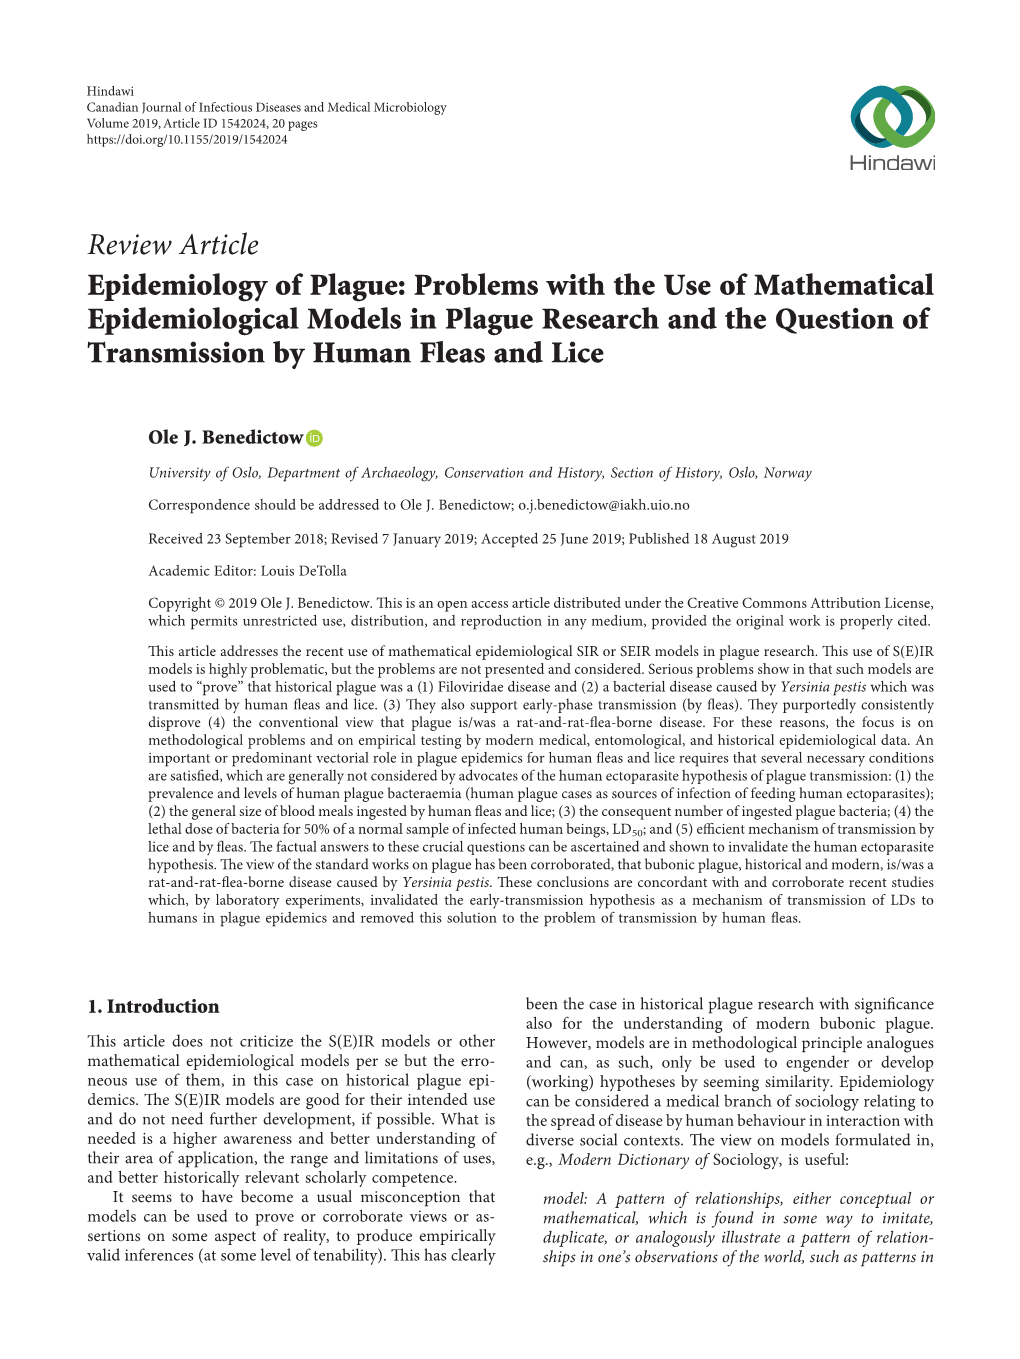 Problems with the Use of Mathematical Epidemiological Models in Plague Research and the Question of Transmission by Human Fleas and Lice